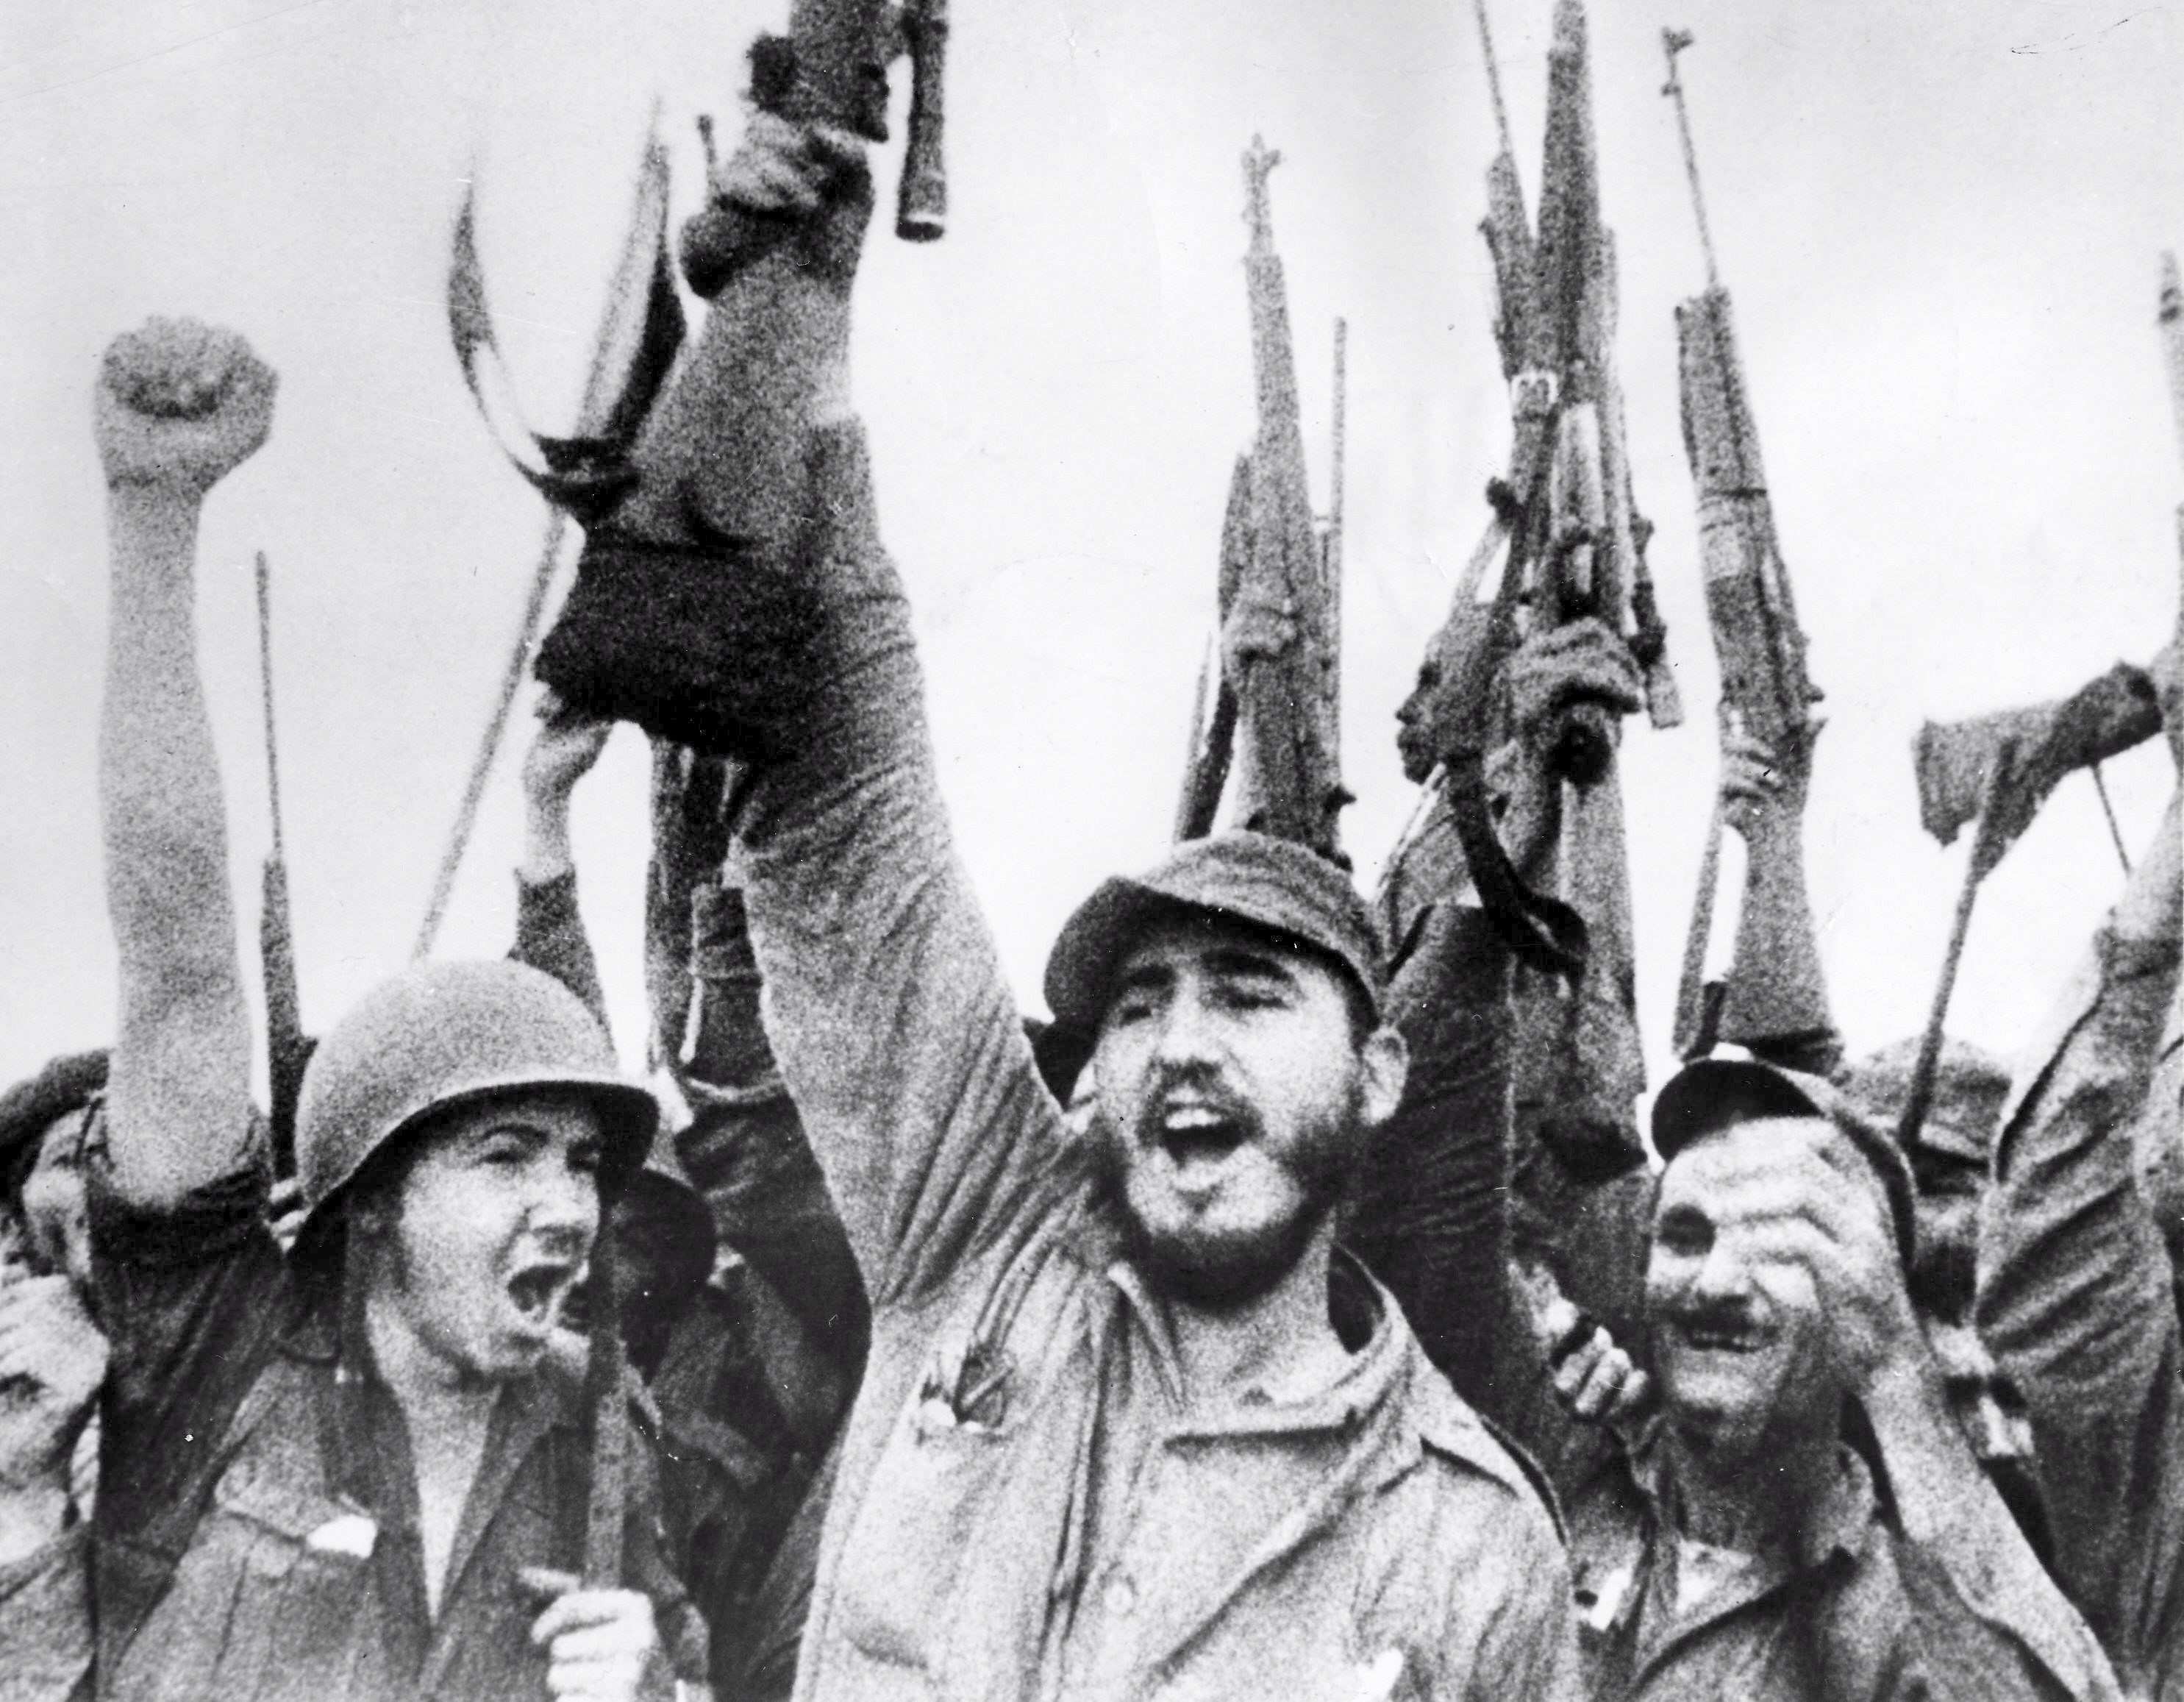 epa01260186 (FILES) File photo dated 08 January 1959 of Fidel Castro (C) as he celebrates the victory of Cuban Revolutionary Movement over Fulgencio Batista's regime. Cuban President, Fidel Castro, announced on 19 February 2008 he renounced his presidency and military leadership of Cuba. European Commission has reiterated on Tuesday its offer of 'striking up a constructive political dialogue which is aimed at the Cuba's democratization. EPA/- EDITORIAL USE ONLY